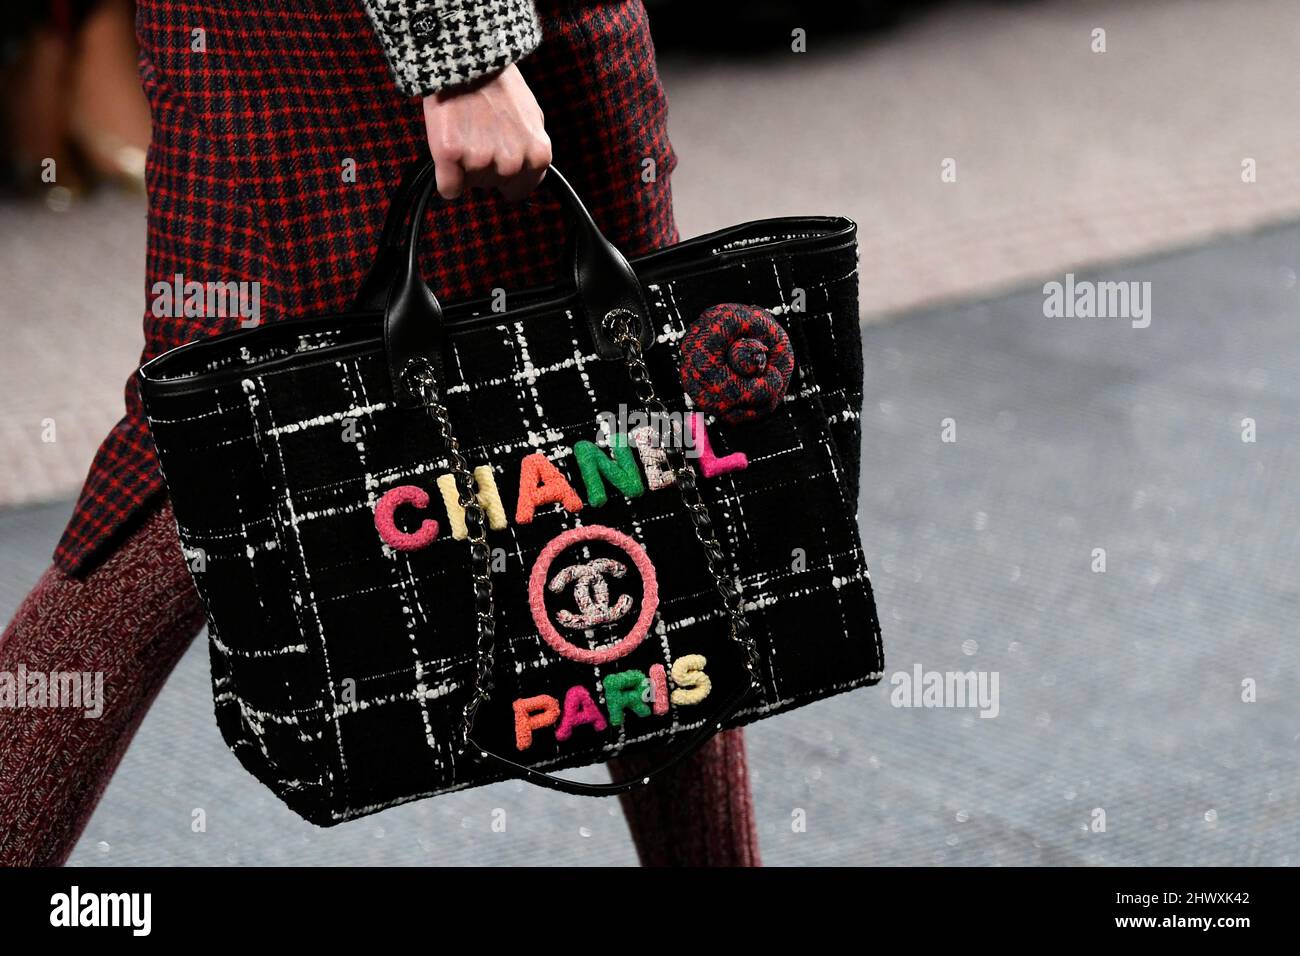 A model presents a bag creation by designer Virginie Viard as part of her  Fall-Winter 2022/2023 Women's ready-to-wear collection show for fashion  house Chanel during Paris Fashion Week in Paris, France, March